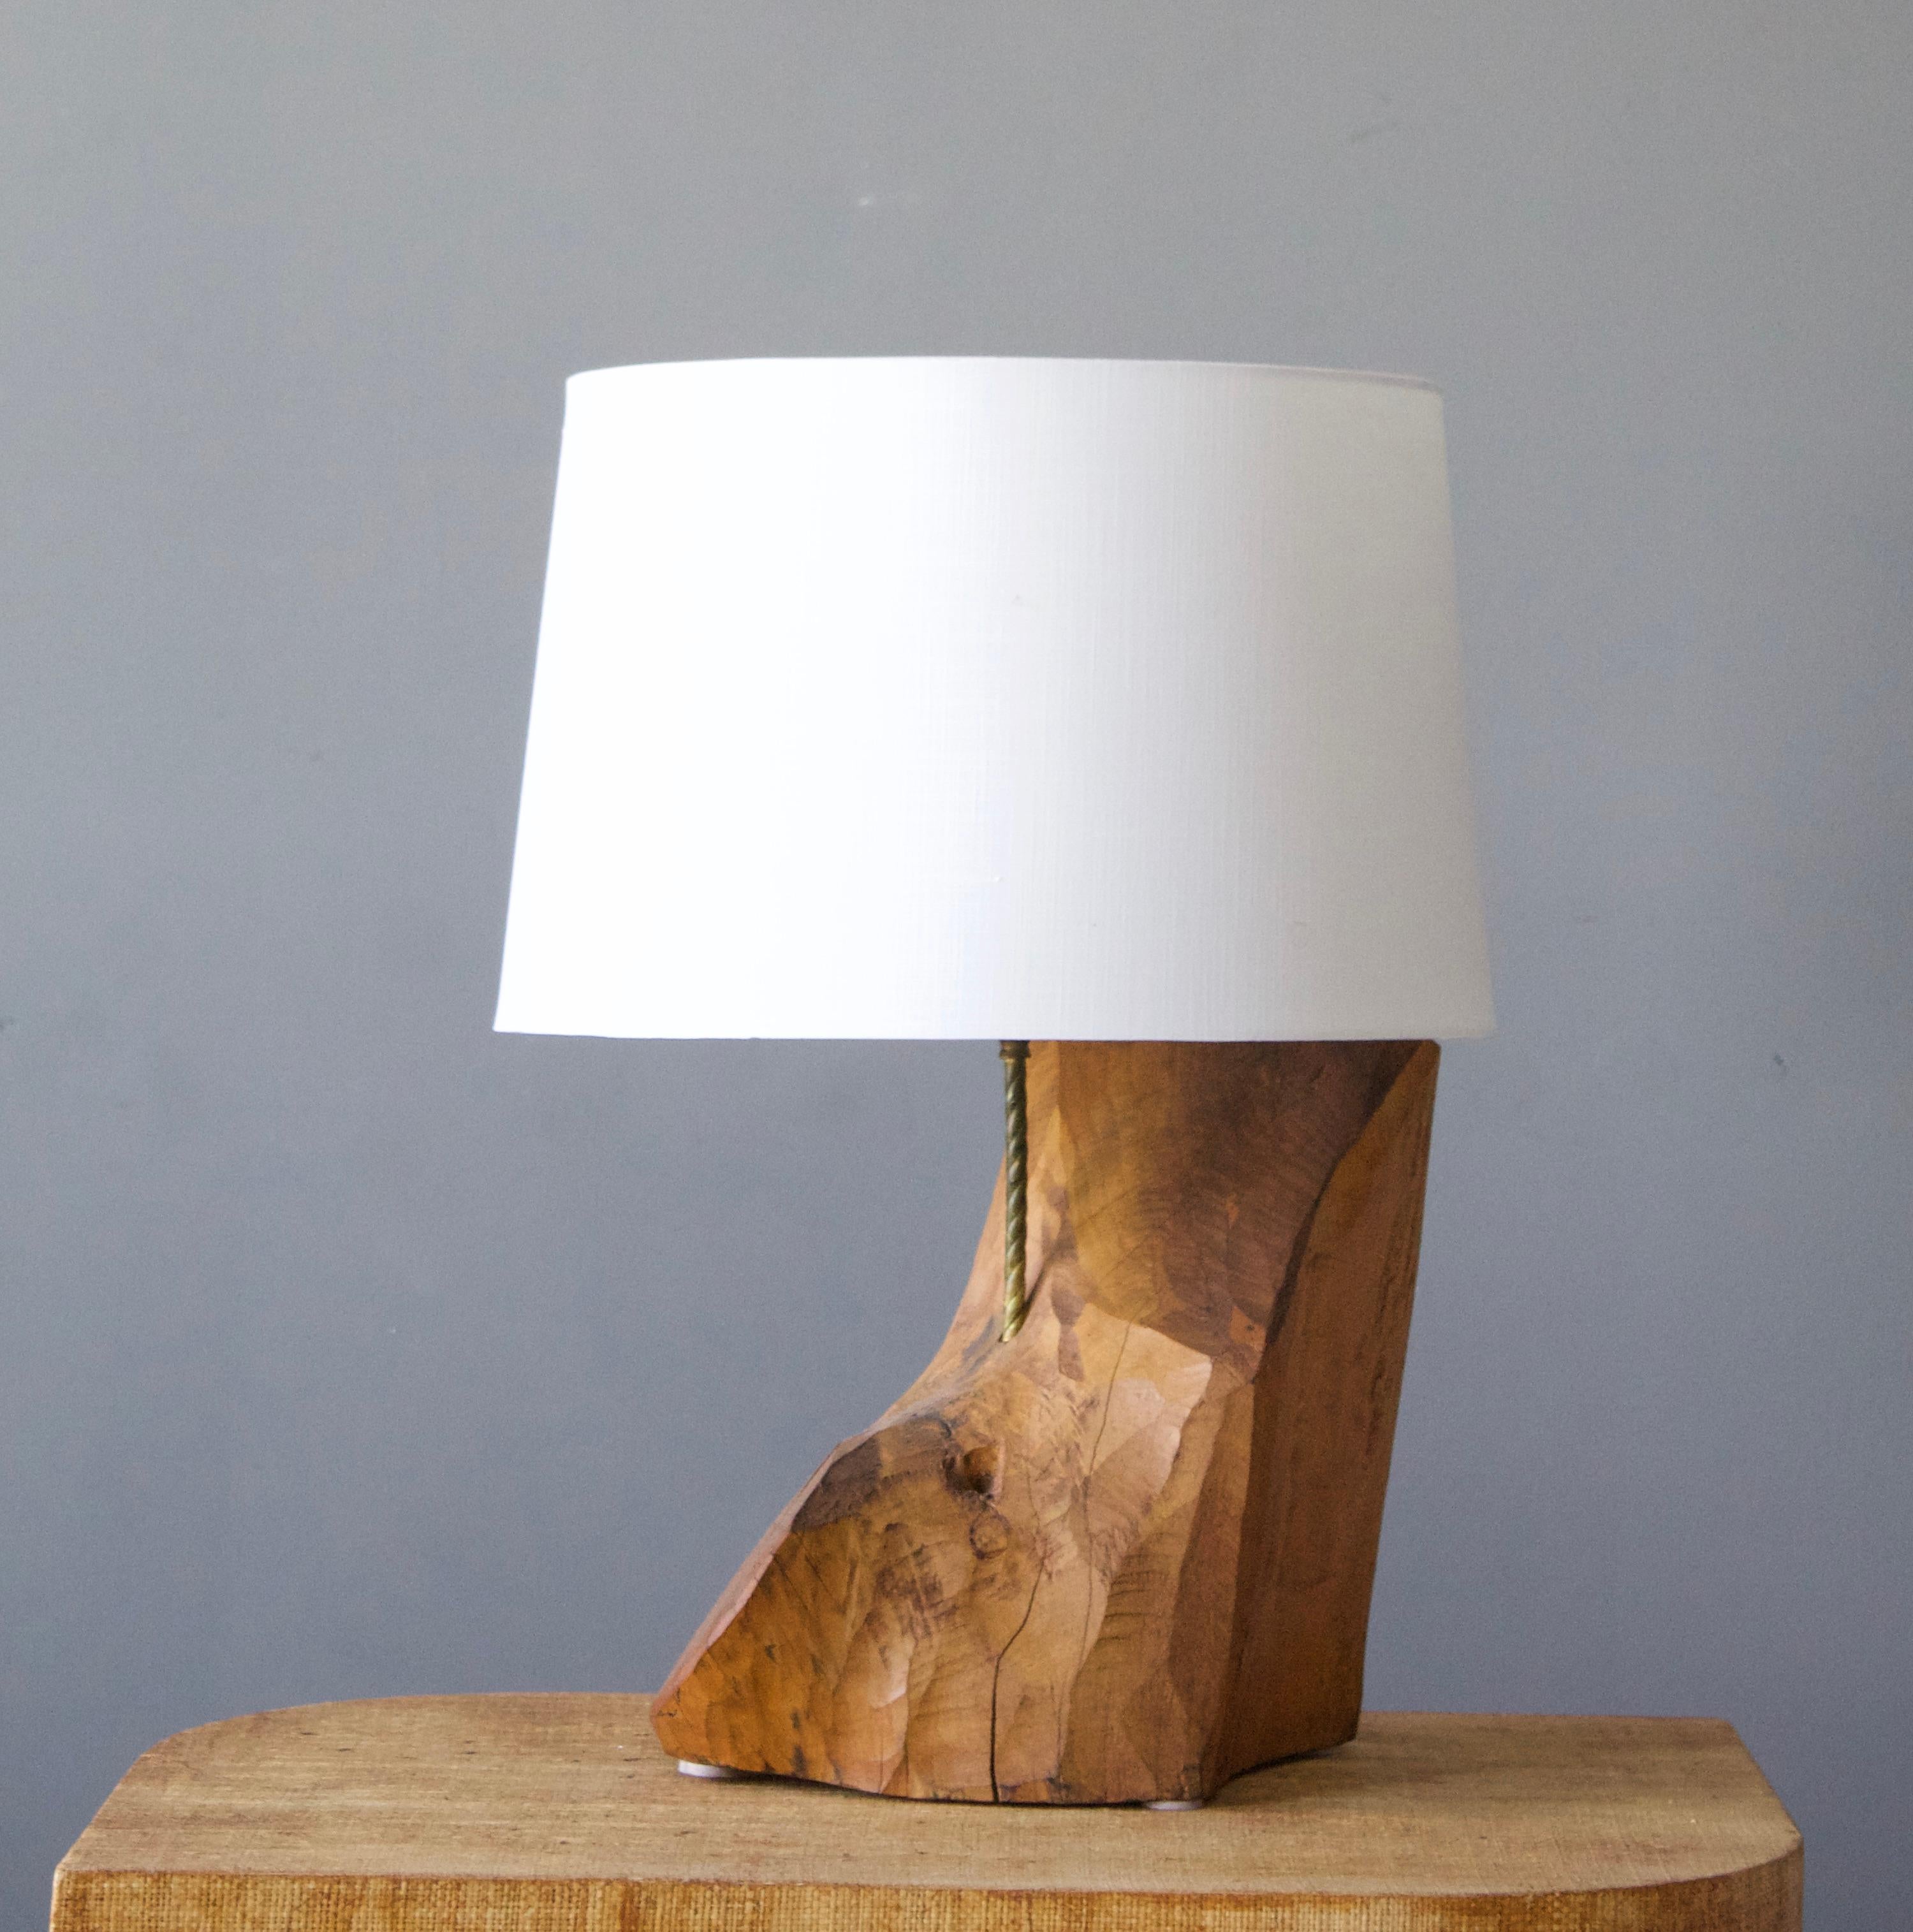 A large table lamp. In solid wood. By unknown studio craftsman.

Sold without lampshade. Stated dimensions excluding lampshade.

Other designers of the period include Alexandre Knoll, George Nakashima, Isamu Noguchi, J.B. Blunk and Paul Frankl.